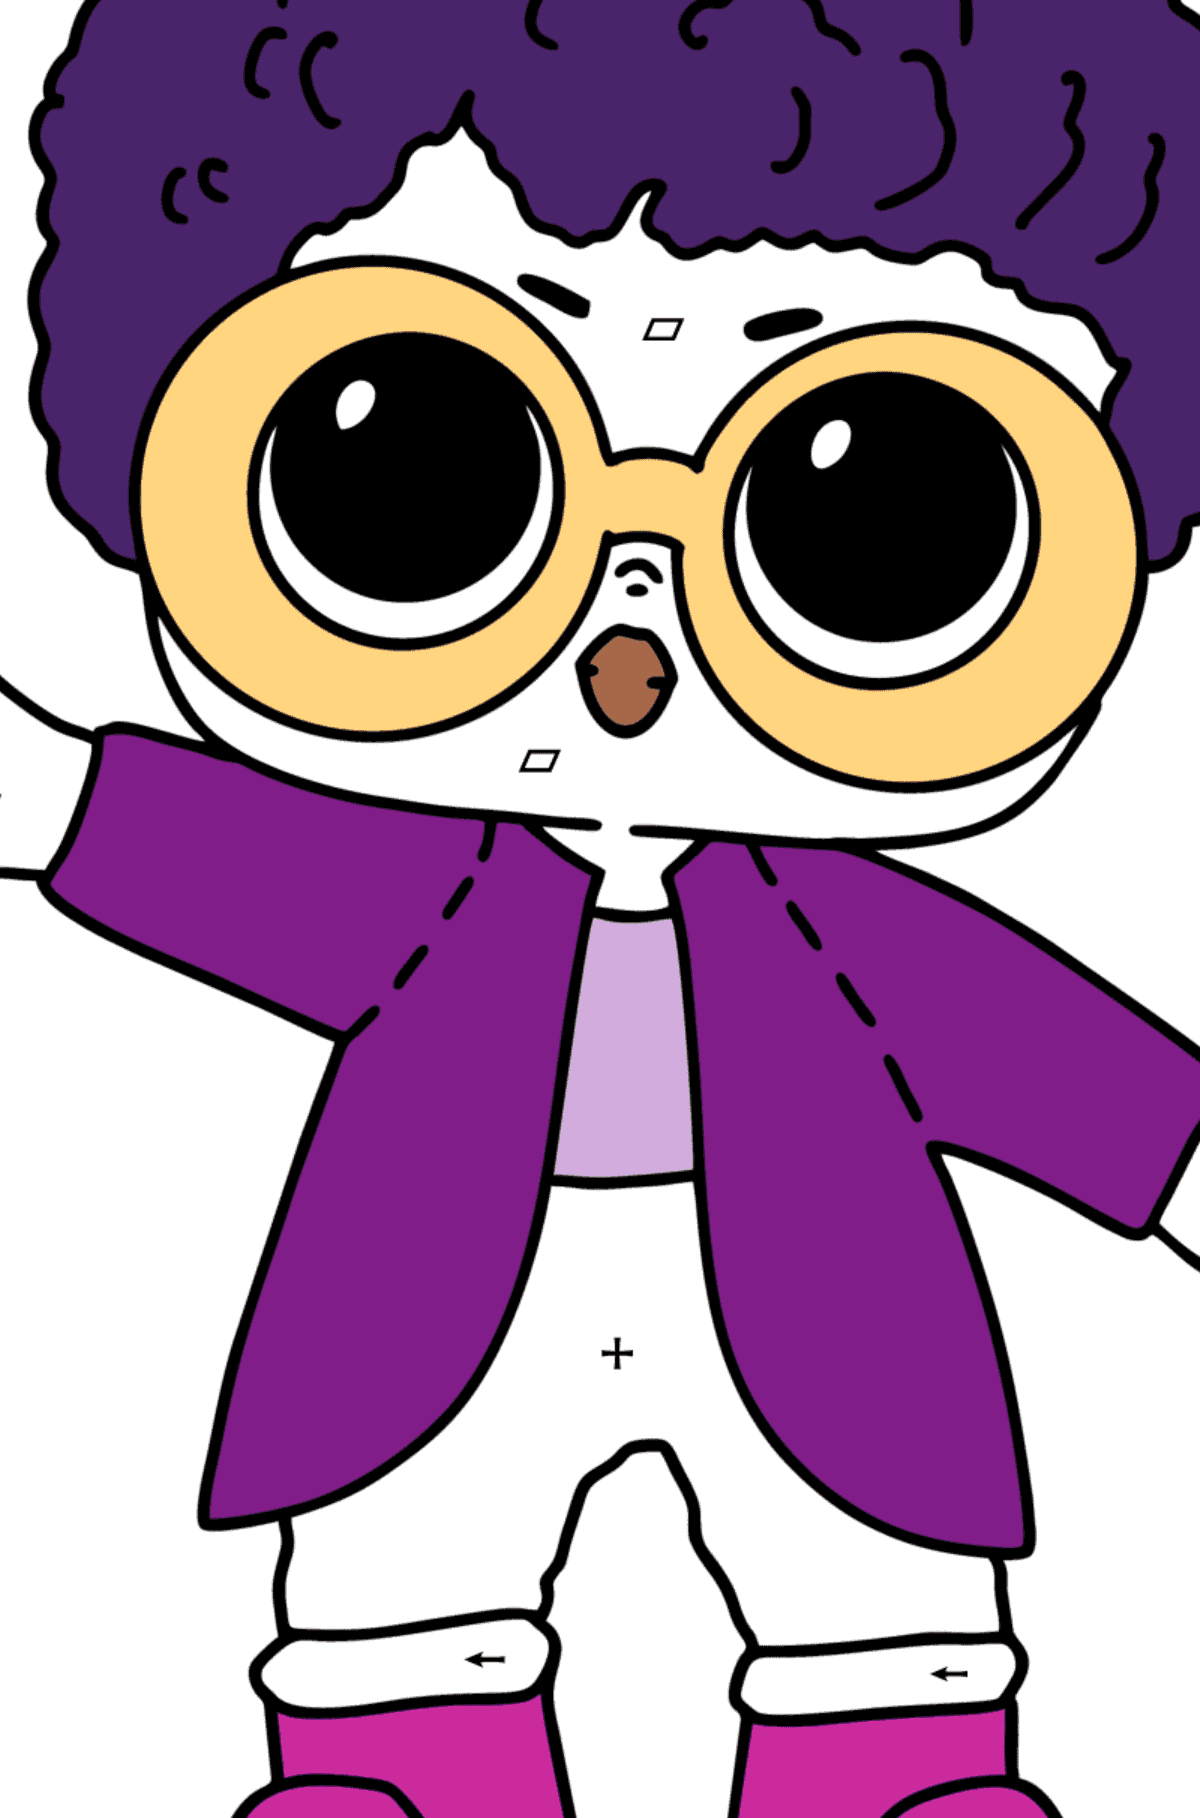 LOL Surprise Purple Reign Doll Boy coloring page - Coloring by Symbols and Geometric Shapes for Kids